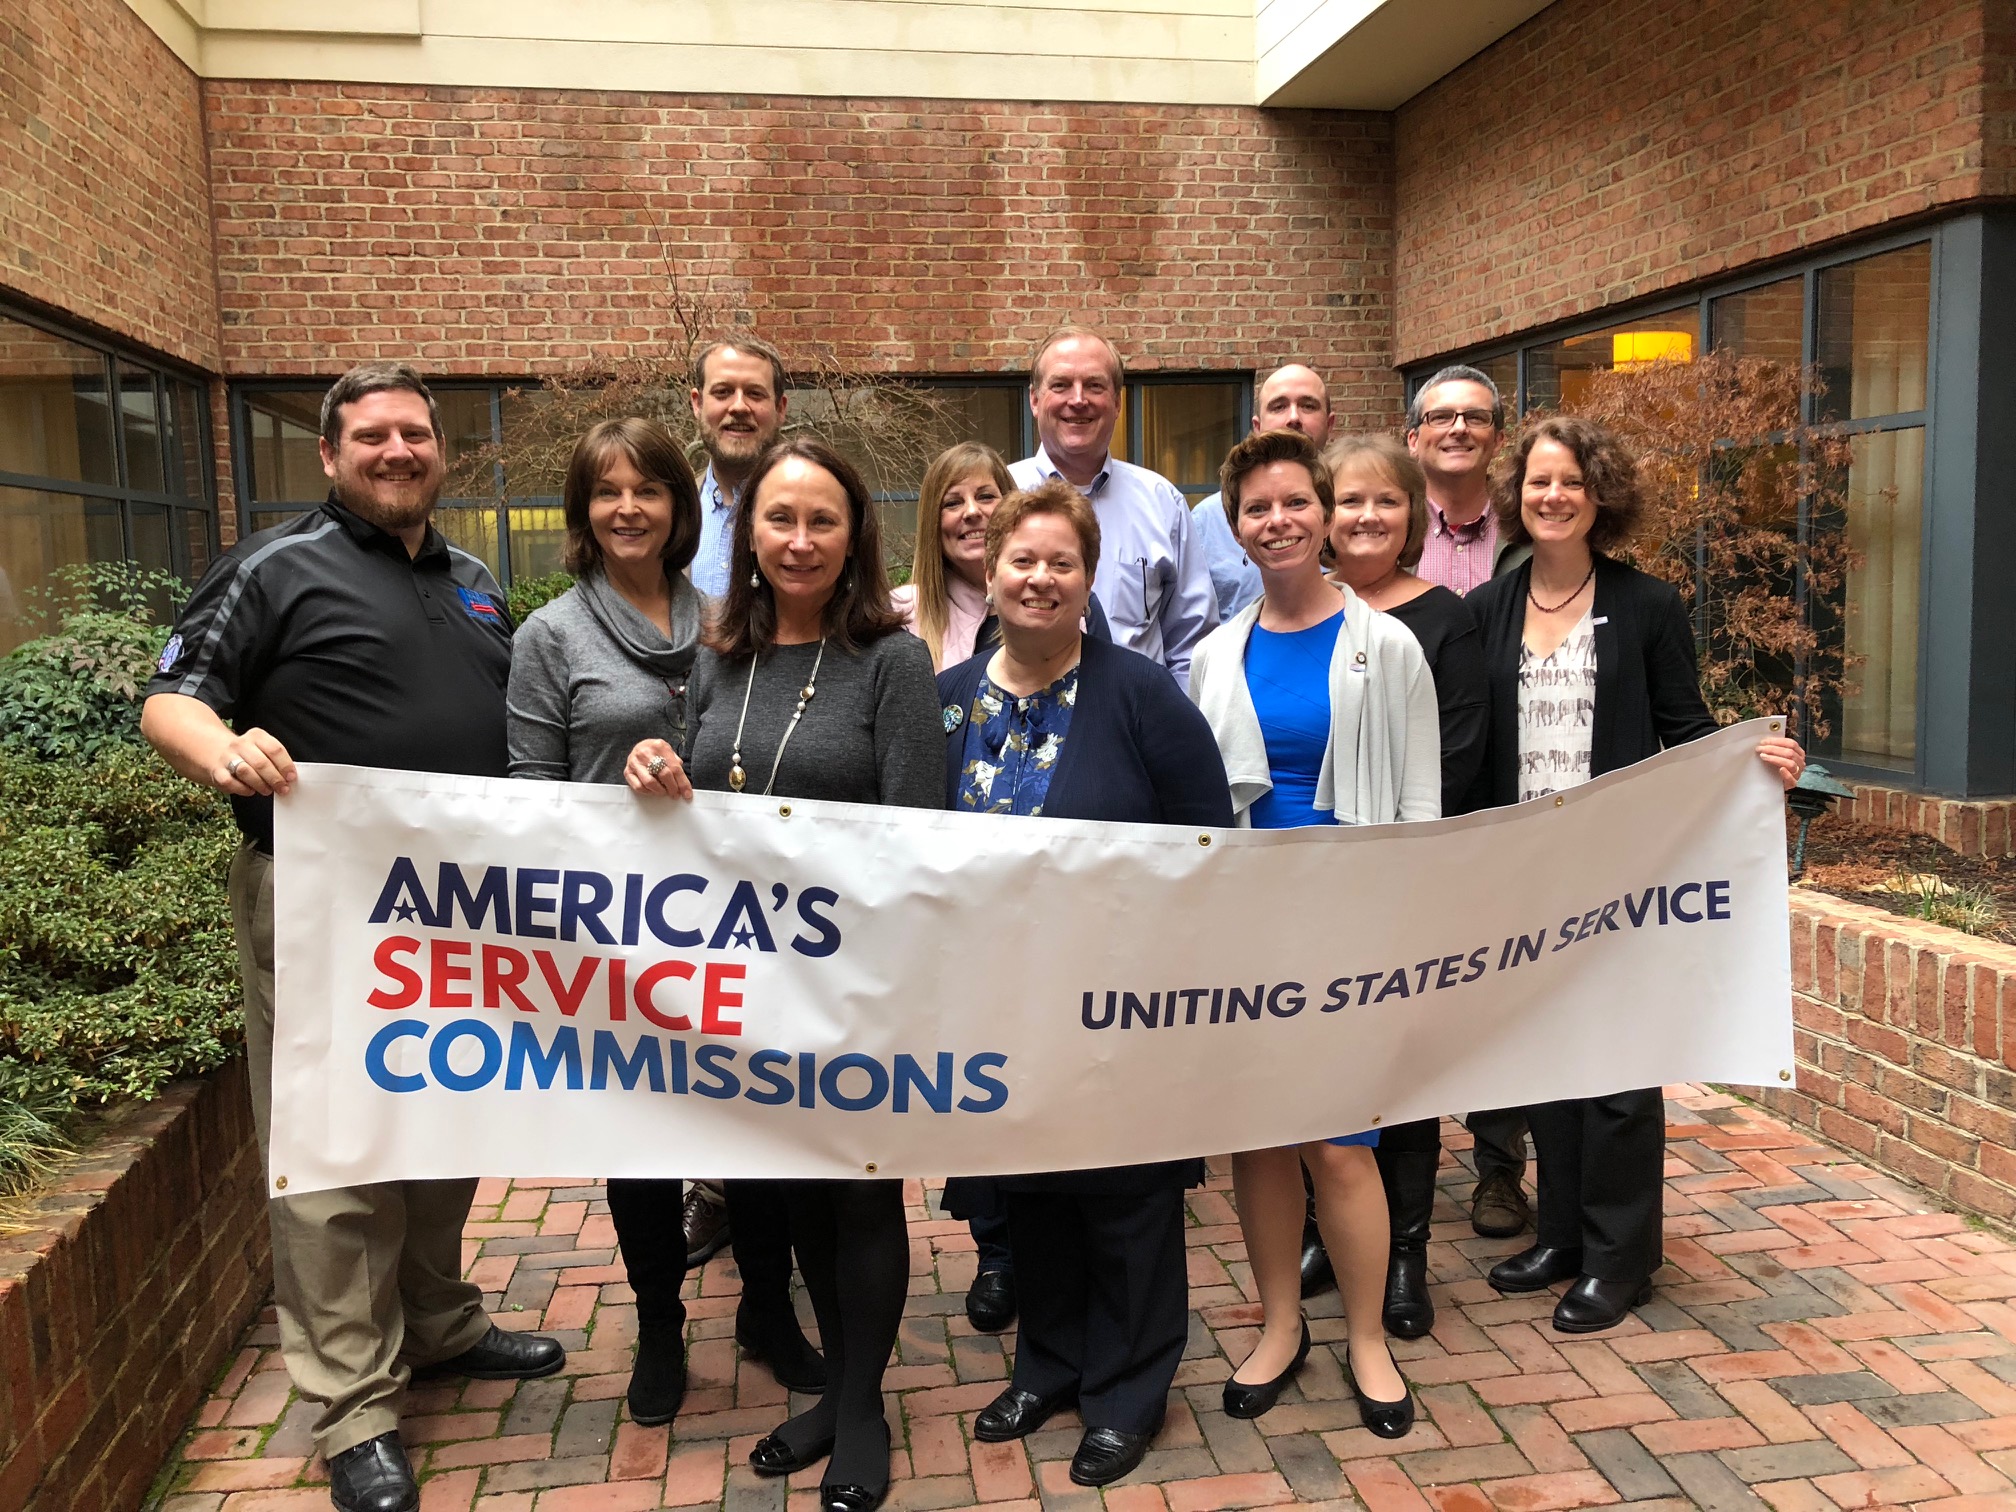 decorative. photo of ASC board and CEO with large ASC banner